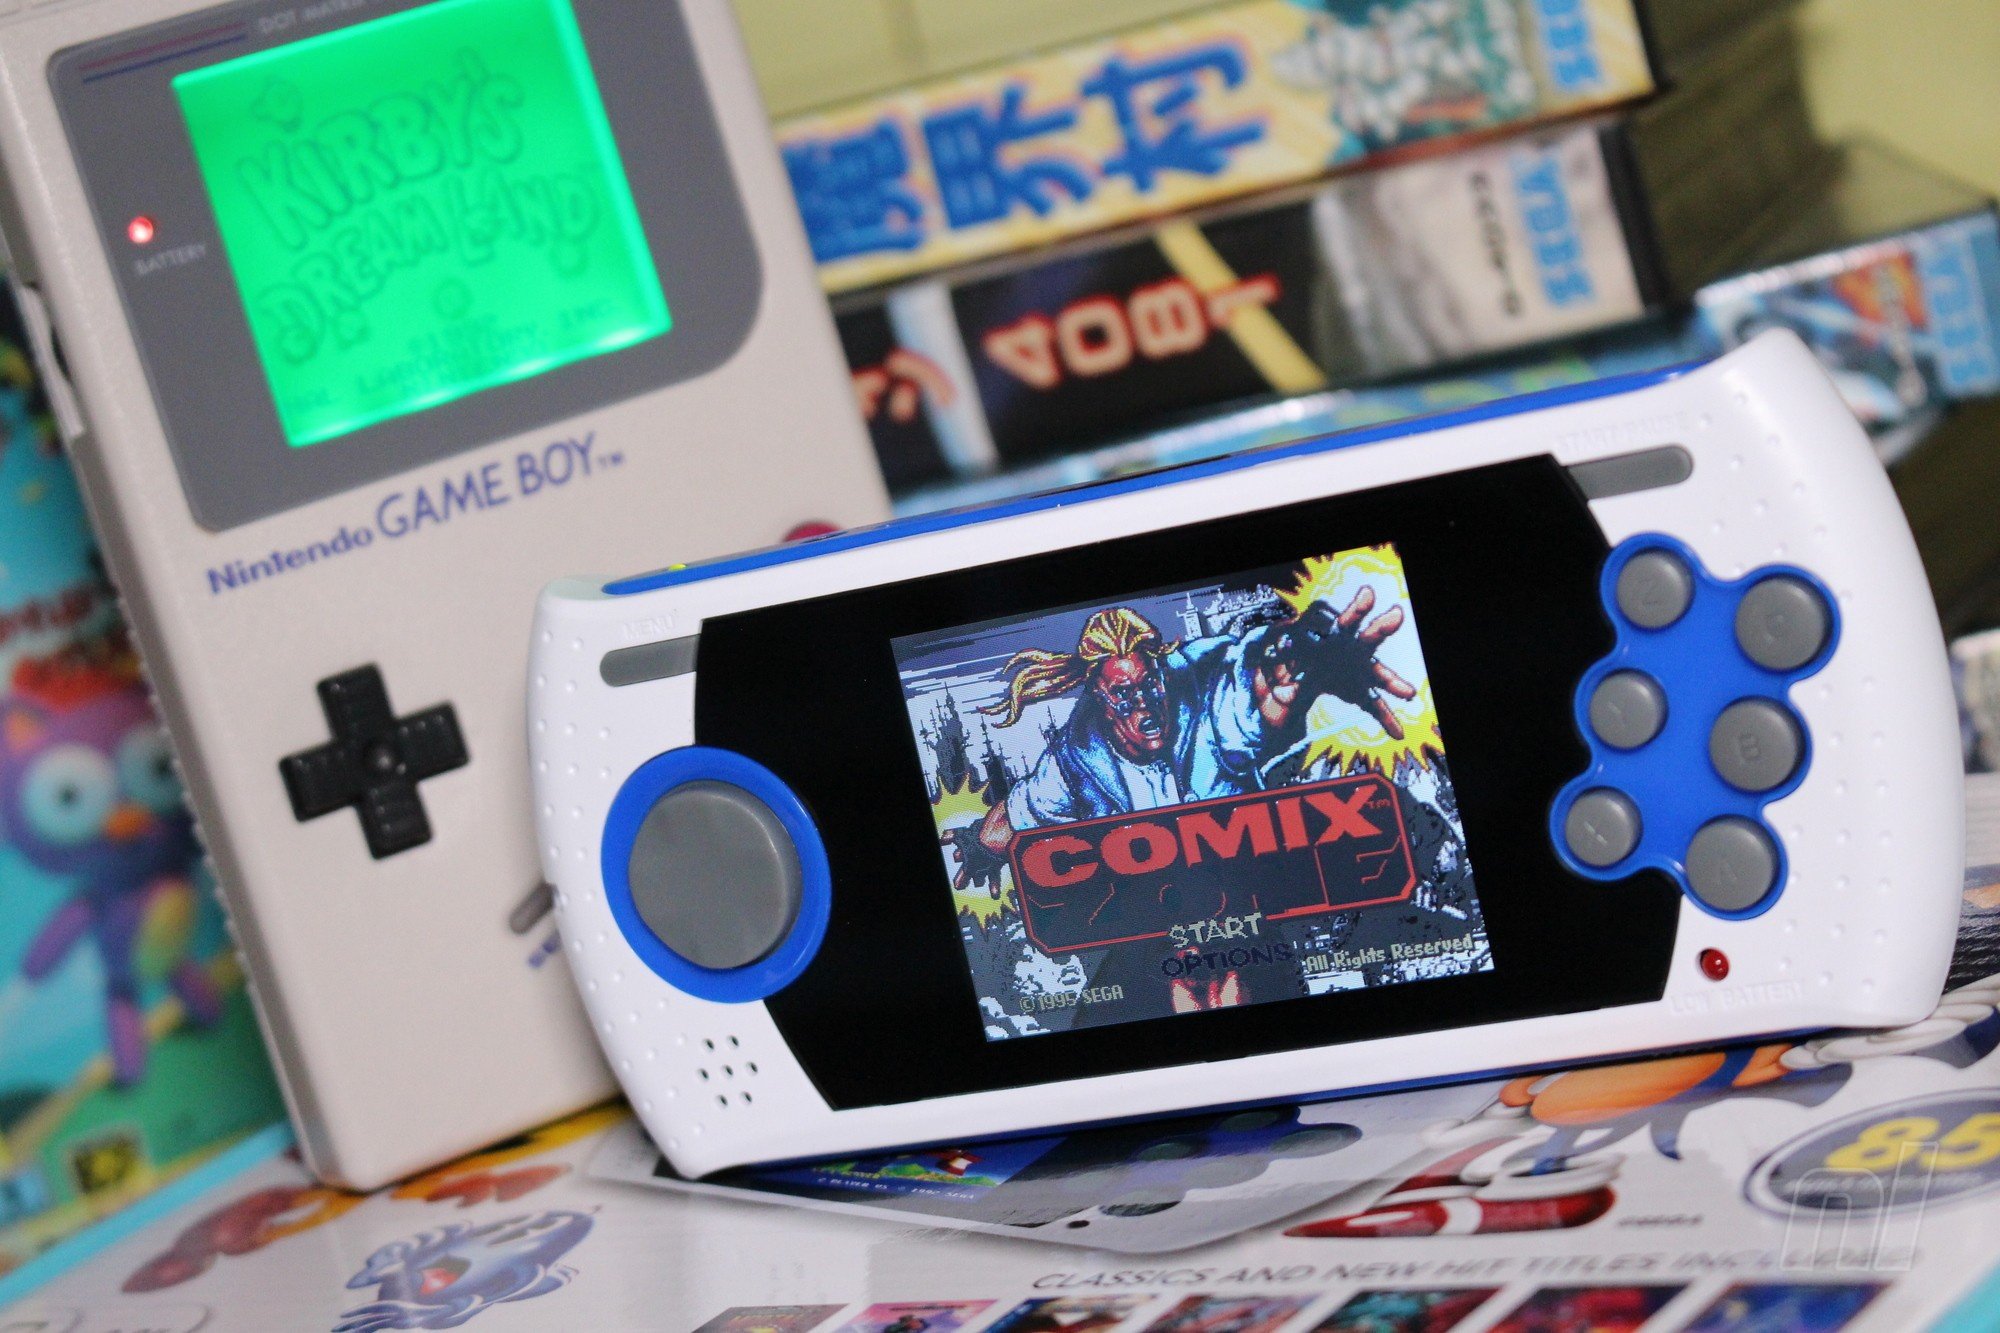 sega ultimate portable game player console with 85 games